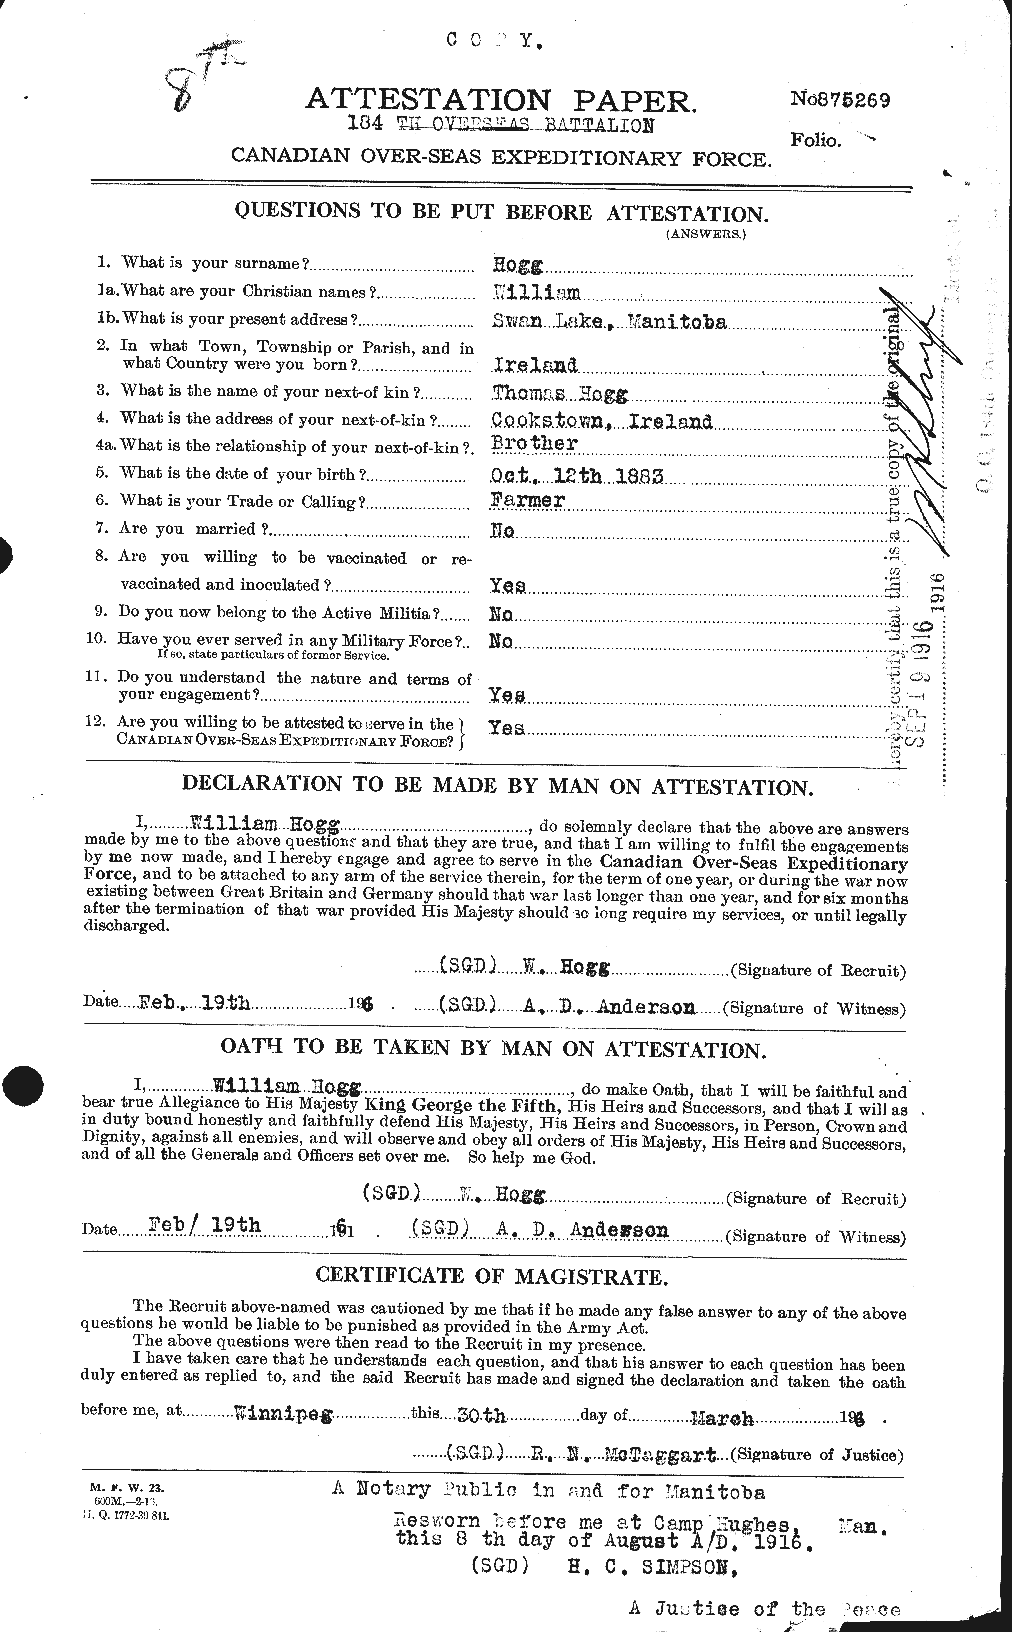 Personnel Records of the First World War - CEF 396463a